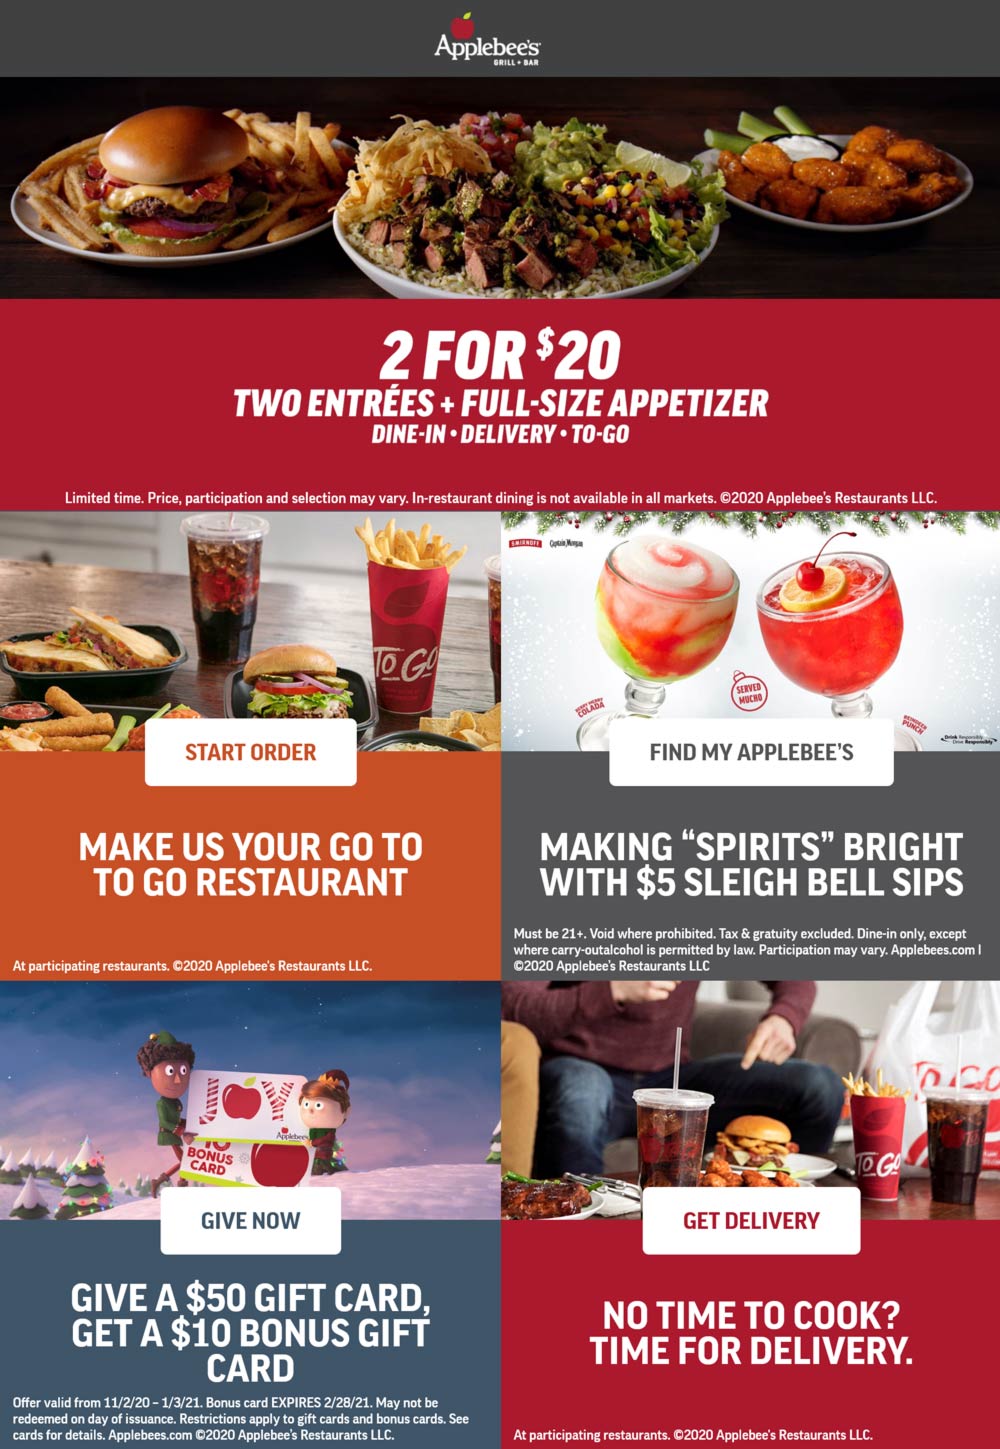 Applebees restaurants Coupon  2 for $20 entrees + appetizer at Applebees #applebees 